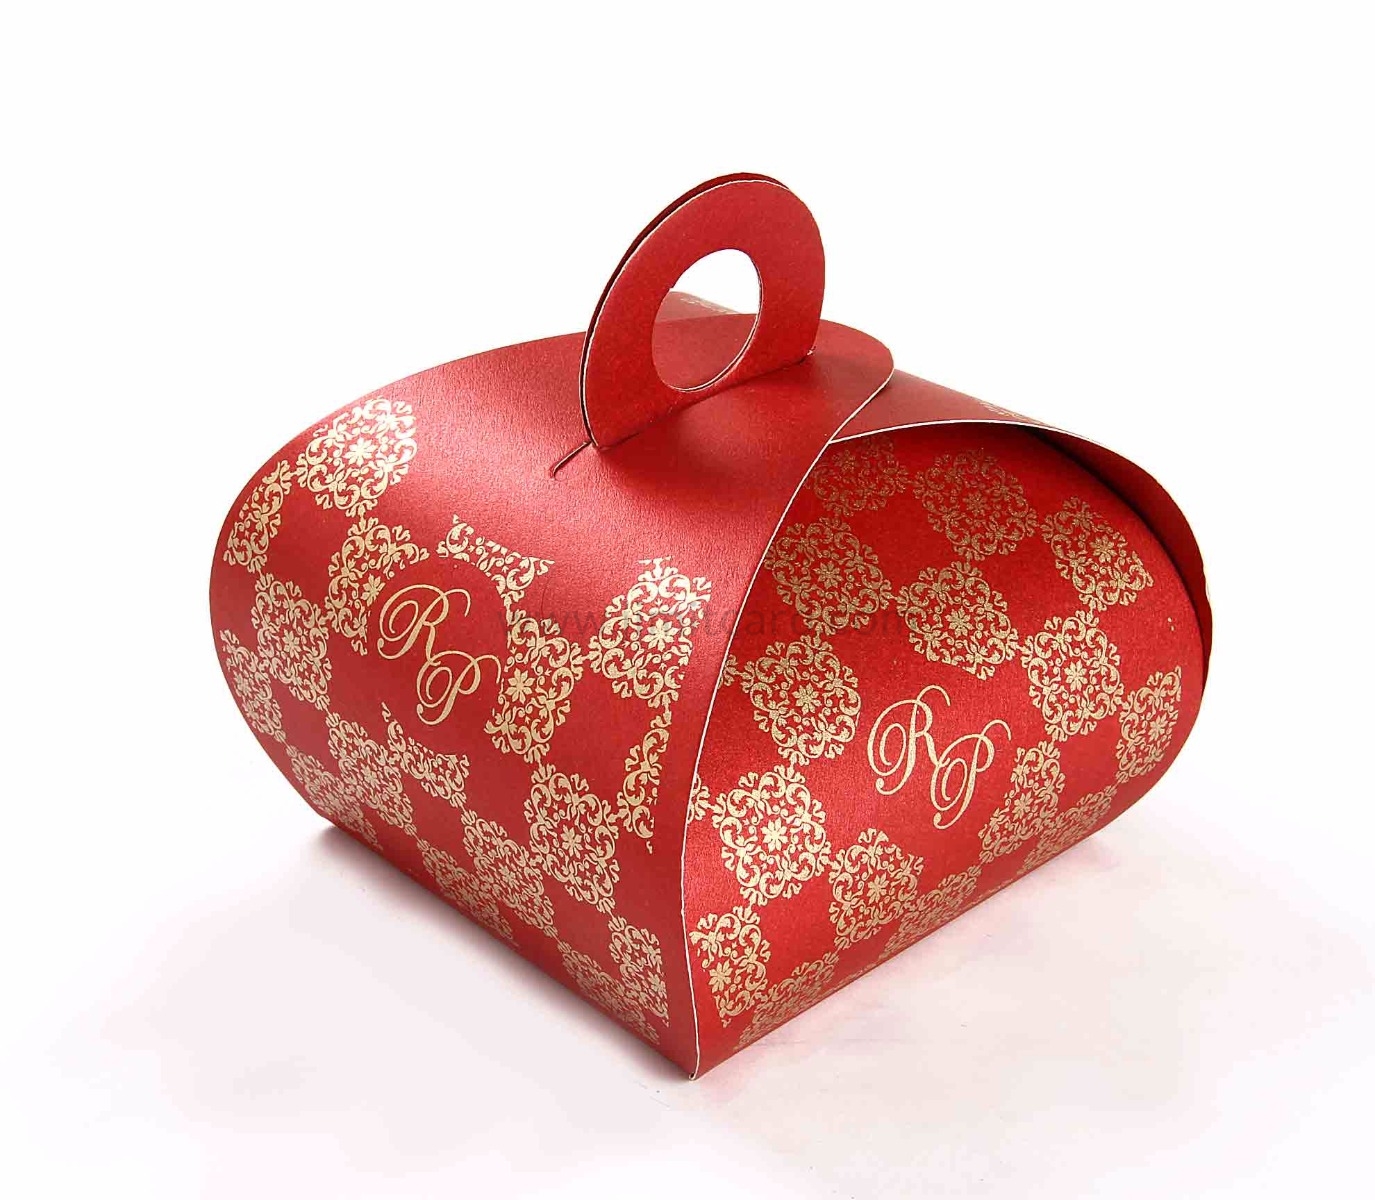 Roll top party Favor Box in Red with a Holder